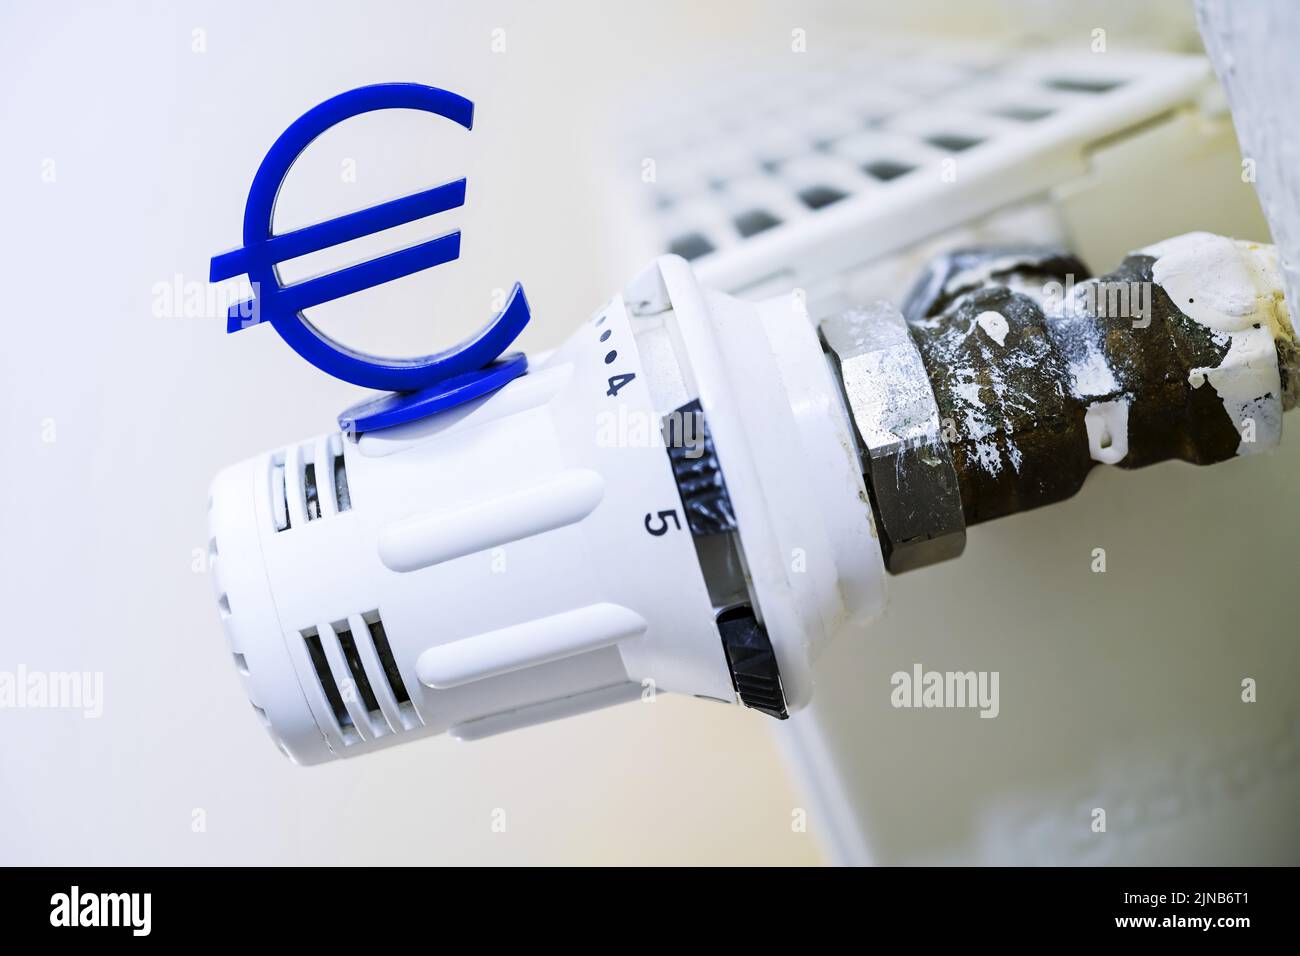 Euro Sign On Heating Thermostat, Symbol Photo Heating Costs And Gas Crisis Stock Photo